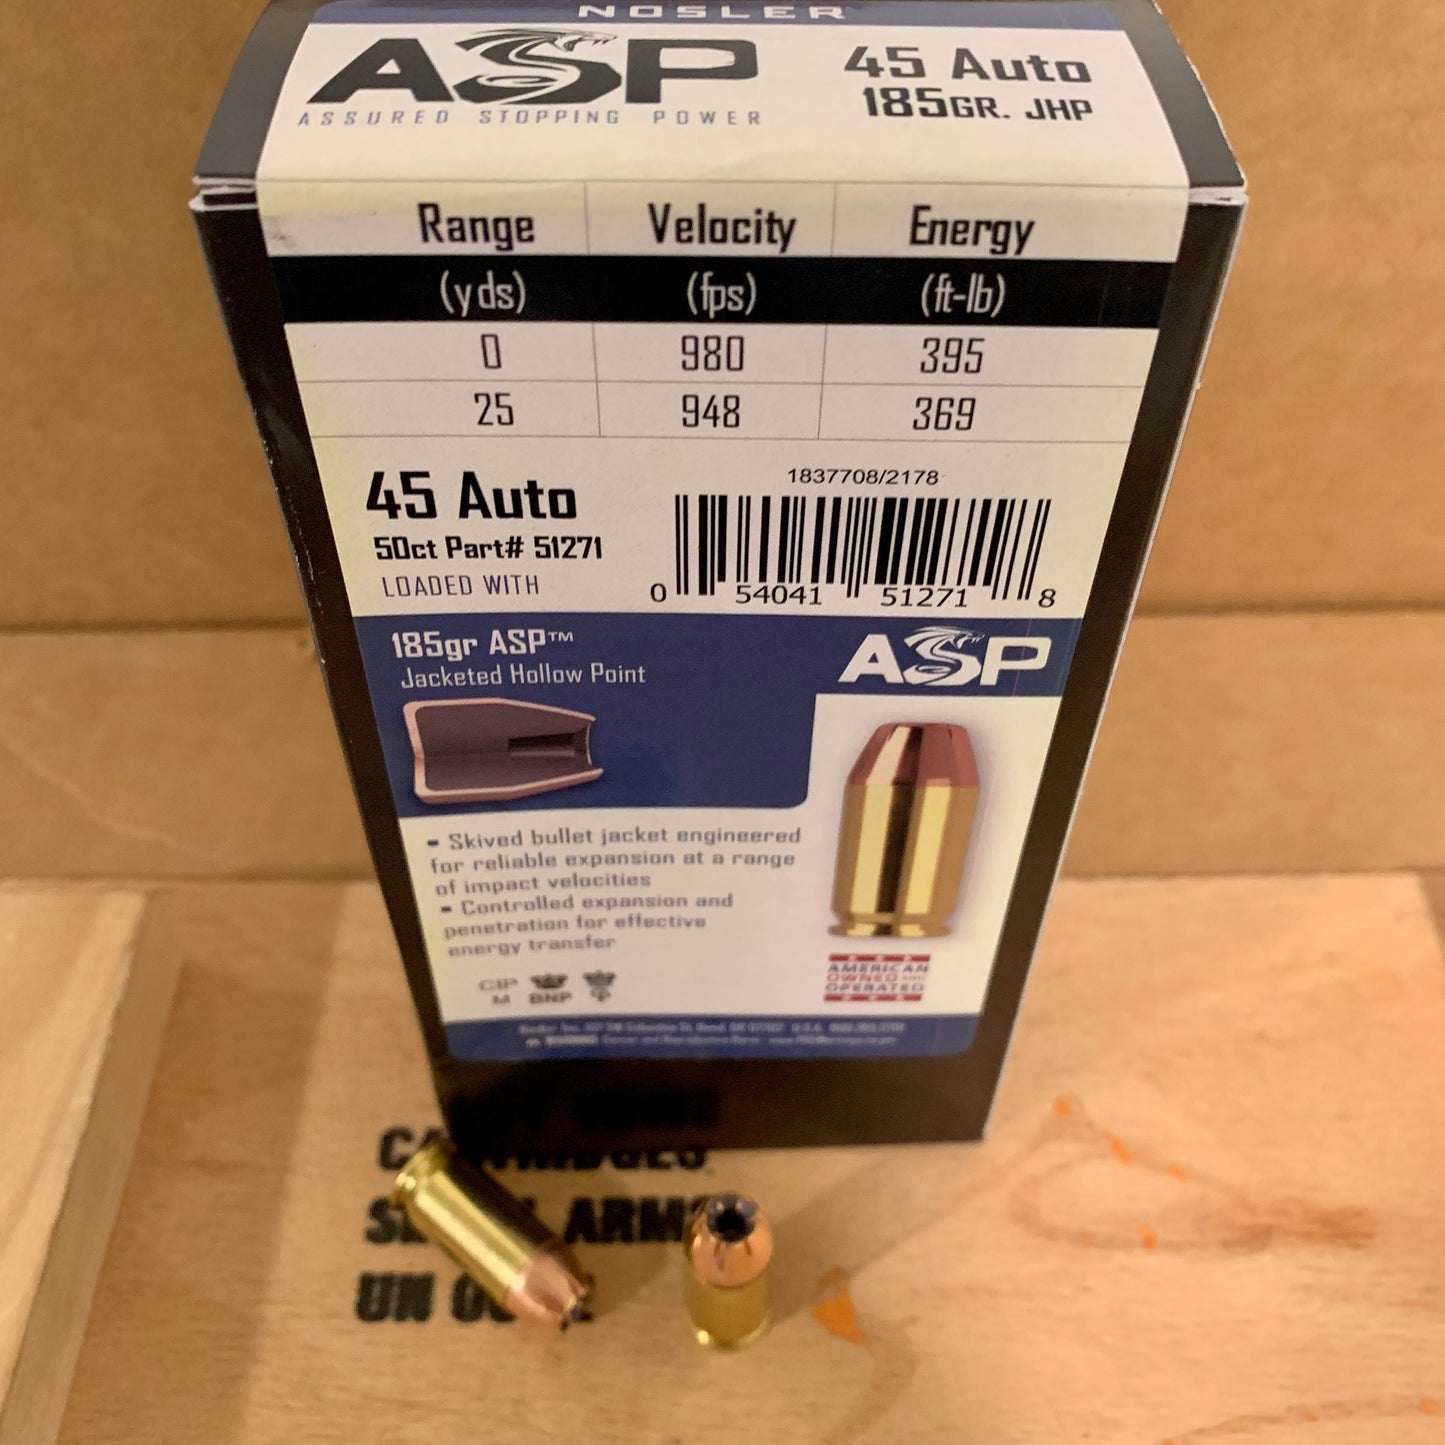 50 Count Box Nosler Assured Stopping Power .45 ACP / Auto Ammo 185gr JHP ASP - 51271